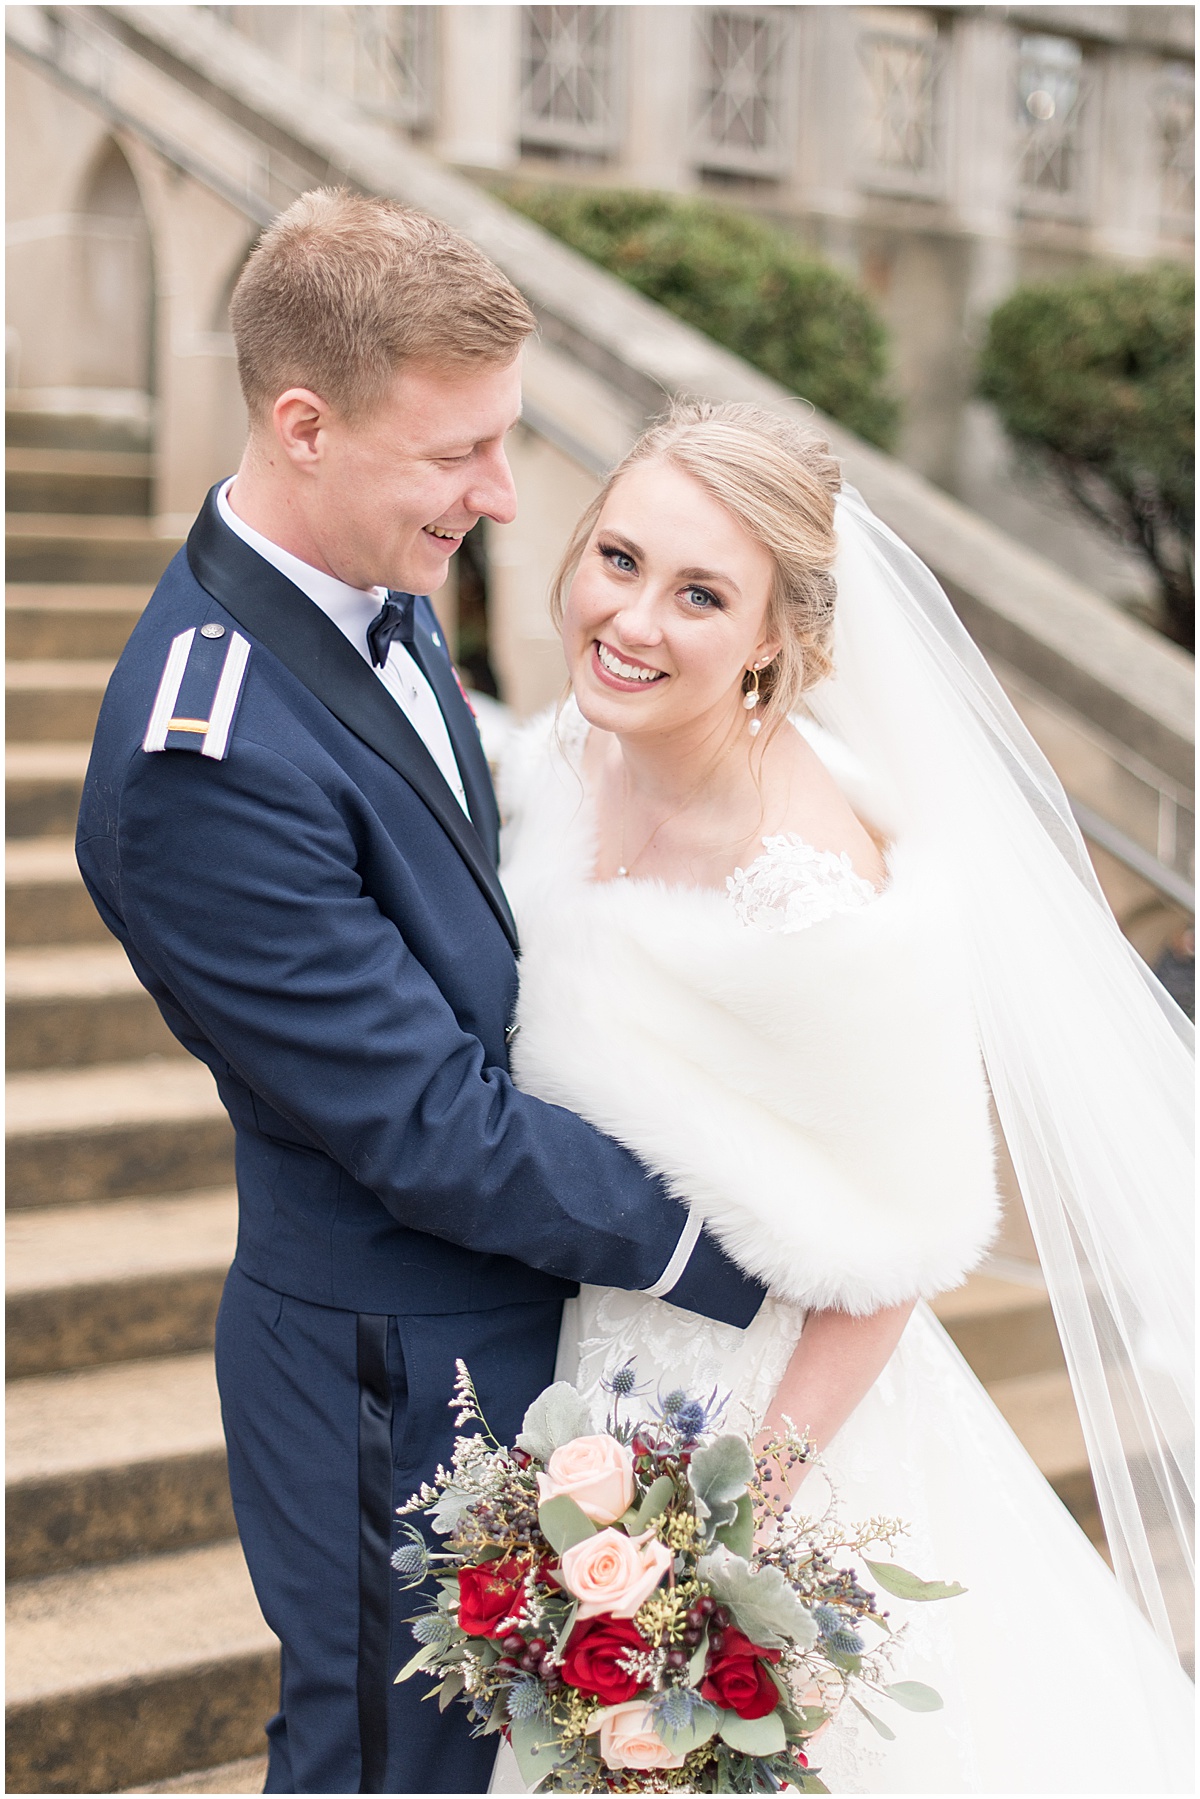 Just married photos after winter wedding at the Cathedral of Saint Mary in Lafayette, Indiana by Victoria Rayburn Photography